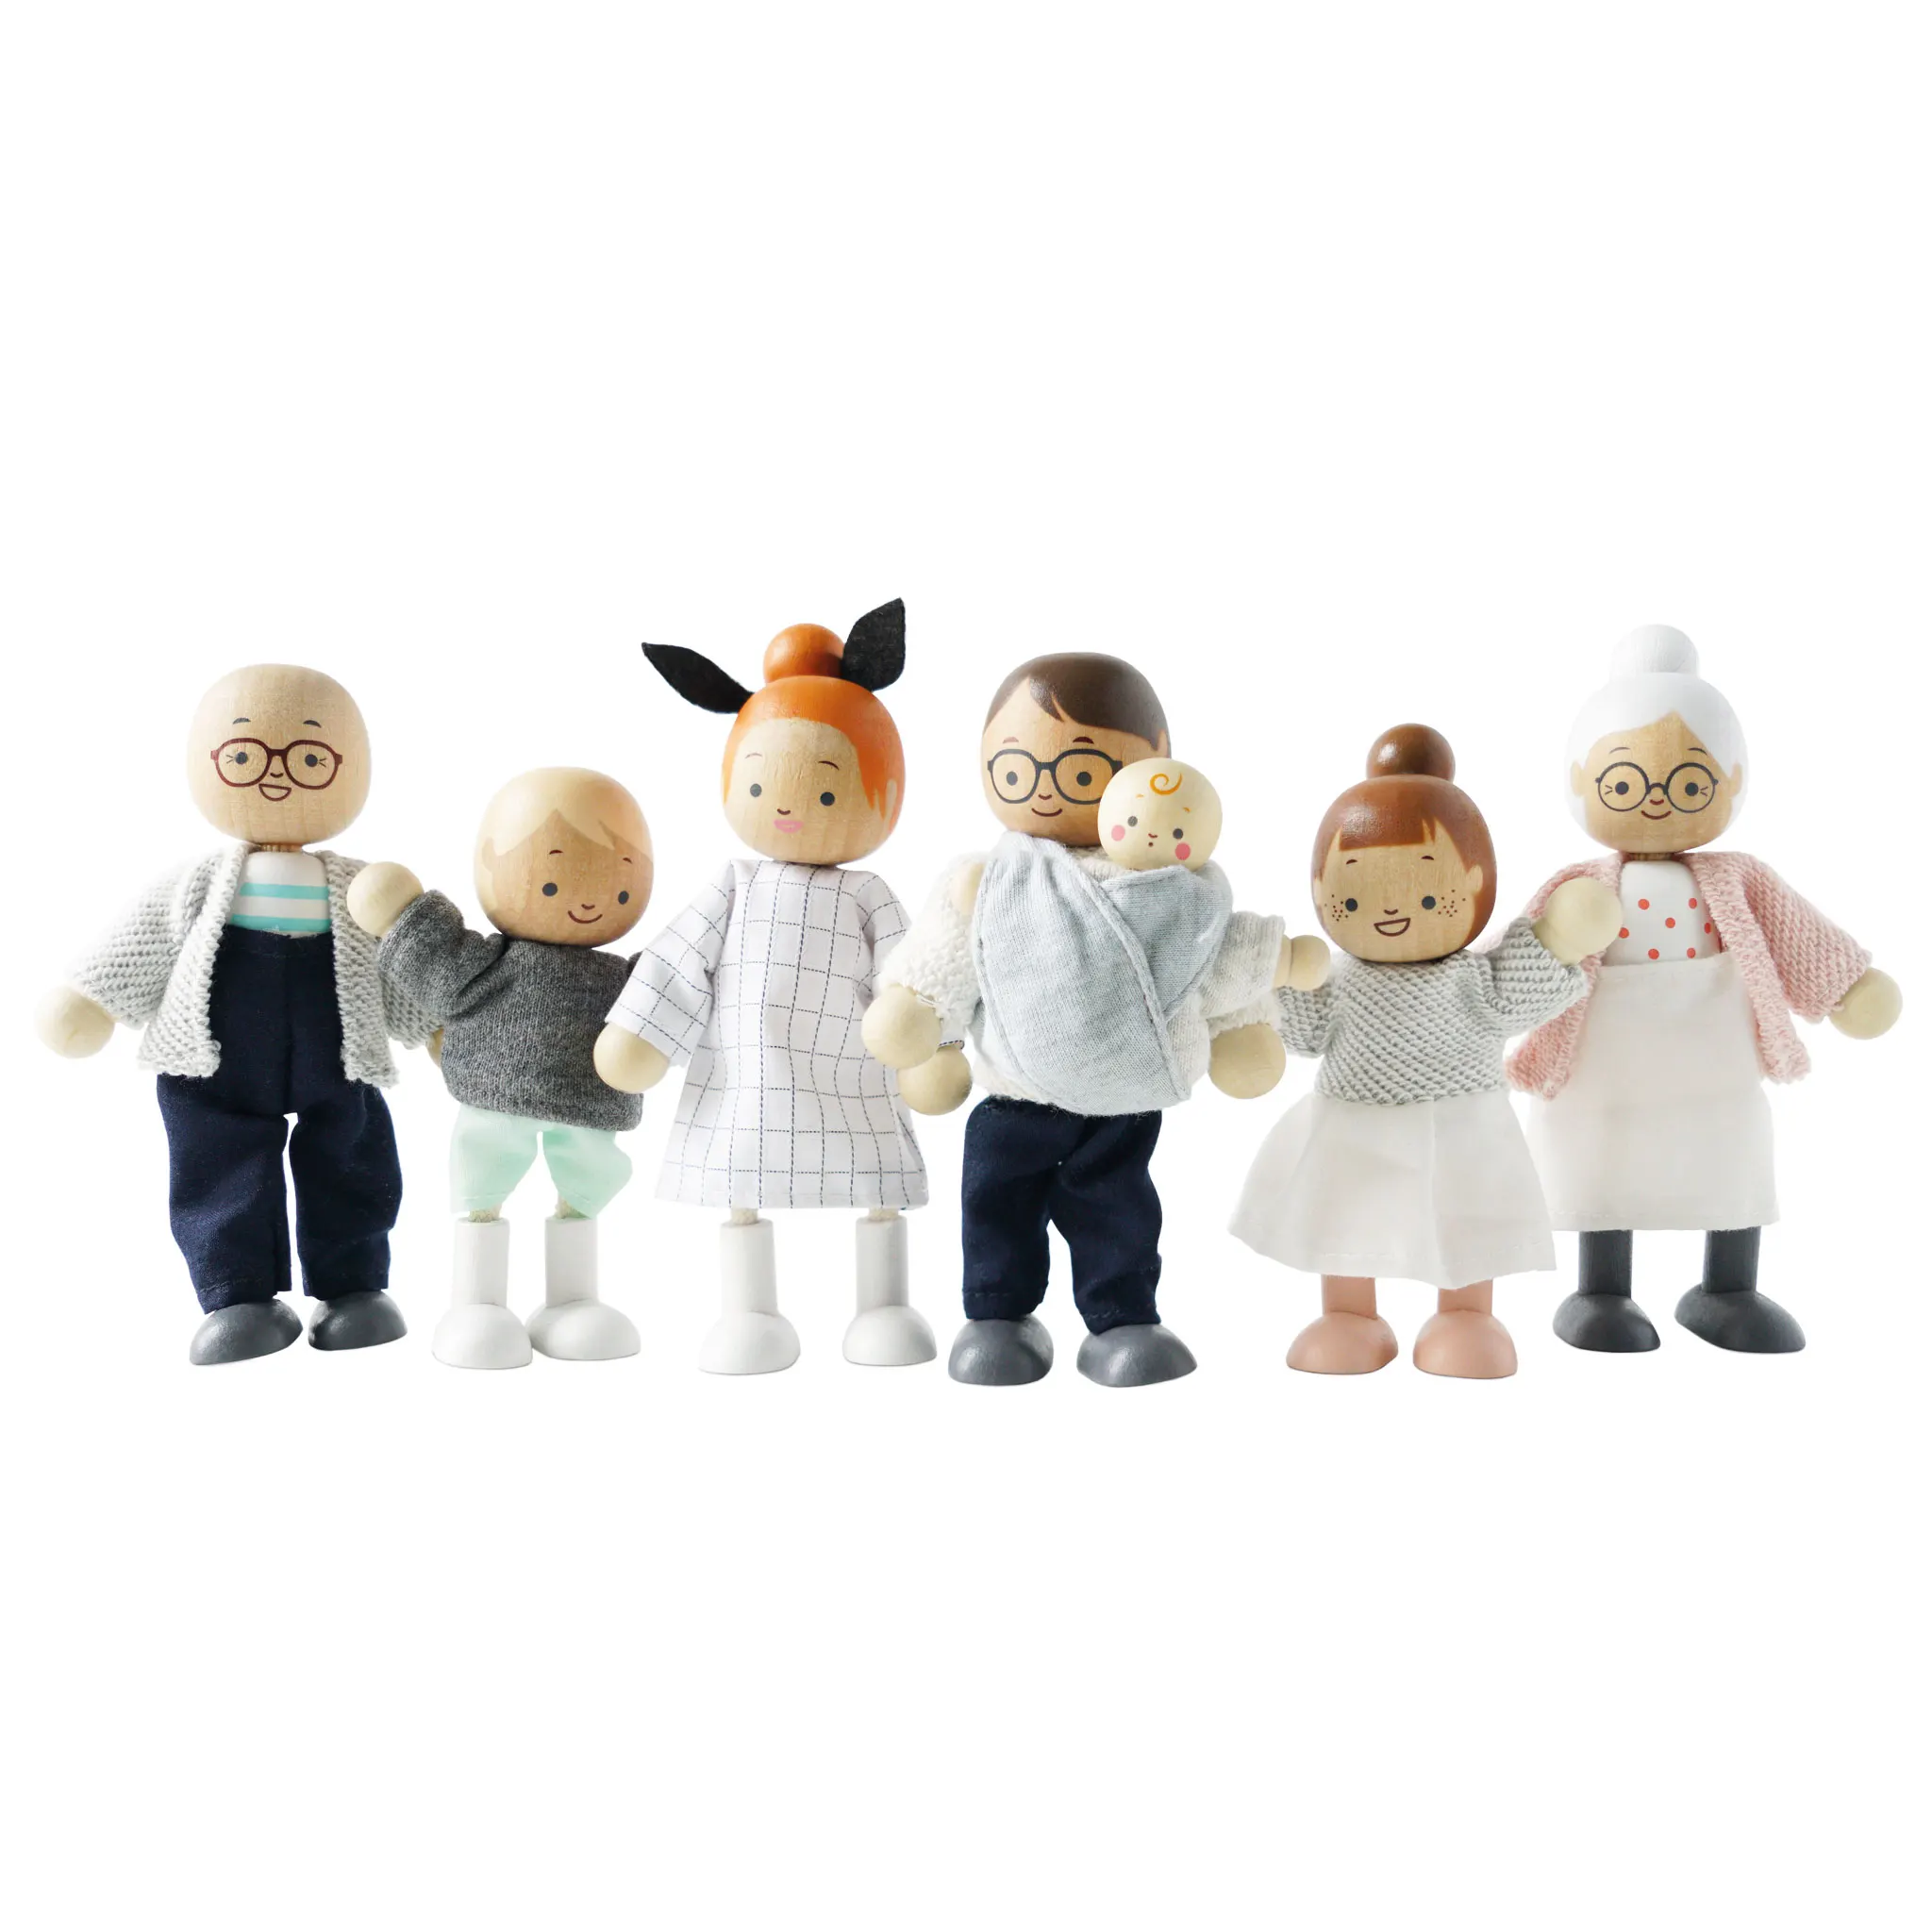 Meine Familie / Dolls House Family - 7 Piece (New Look)